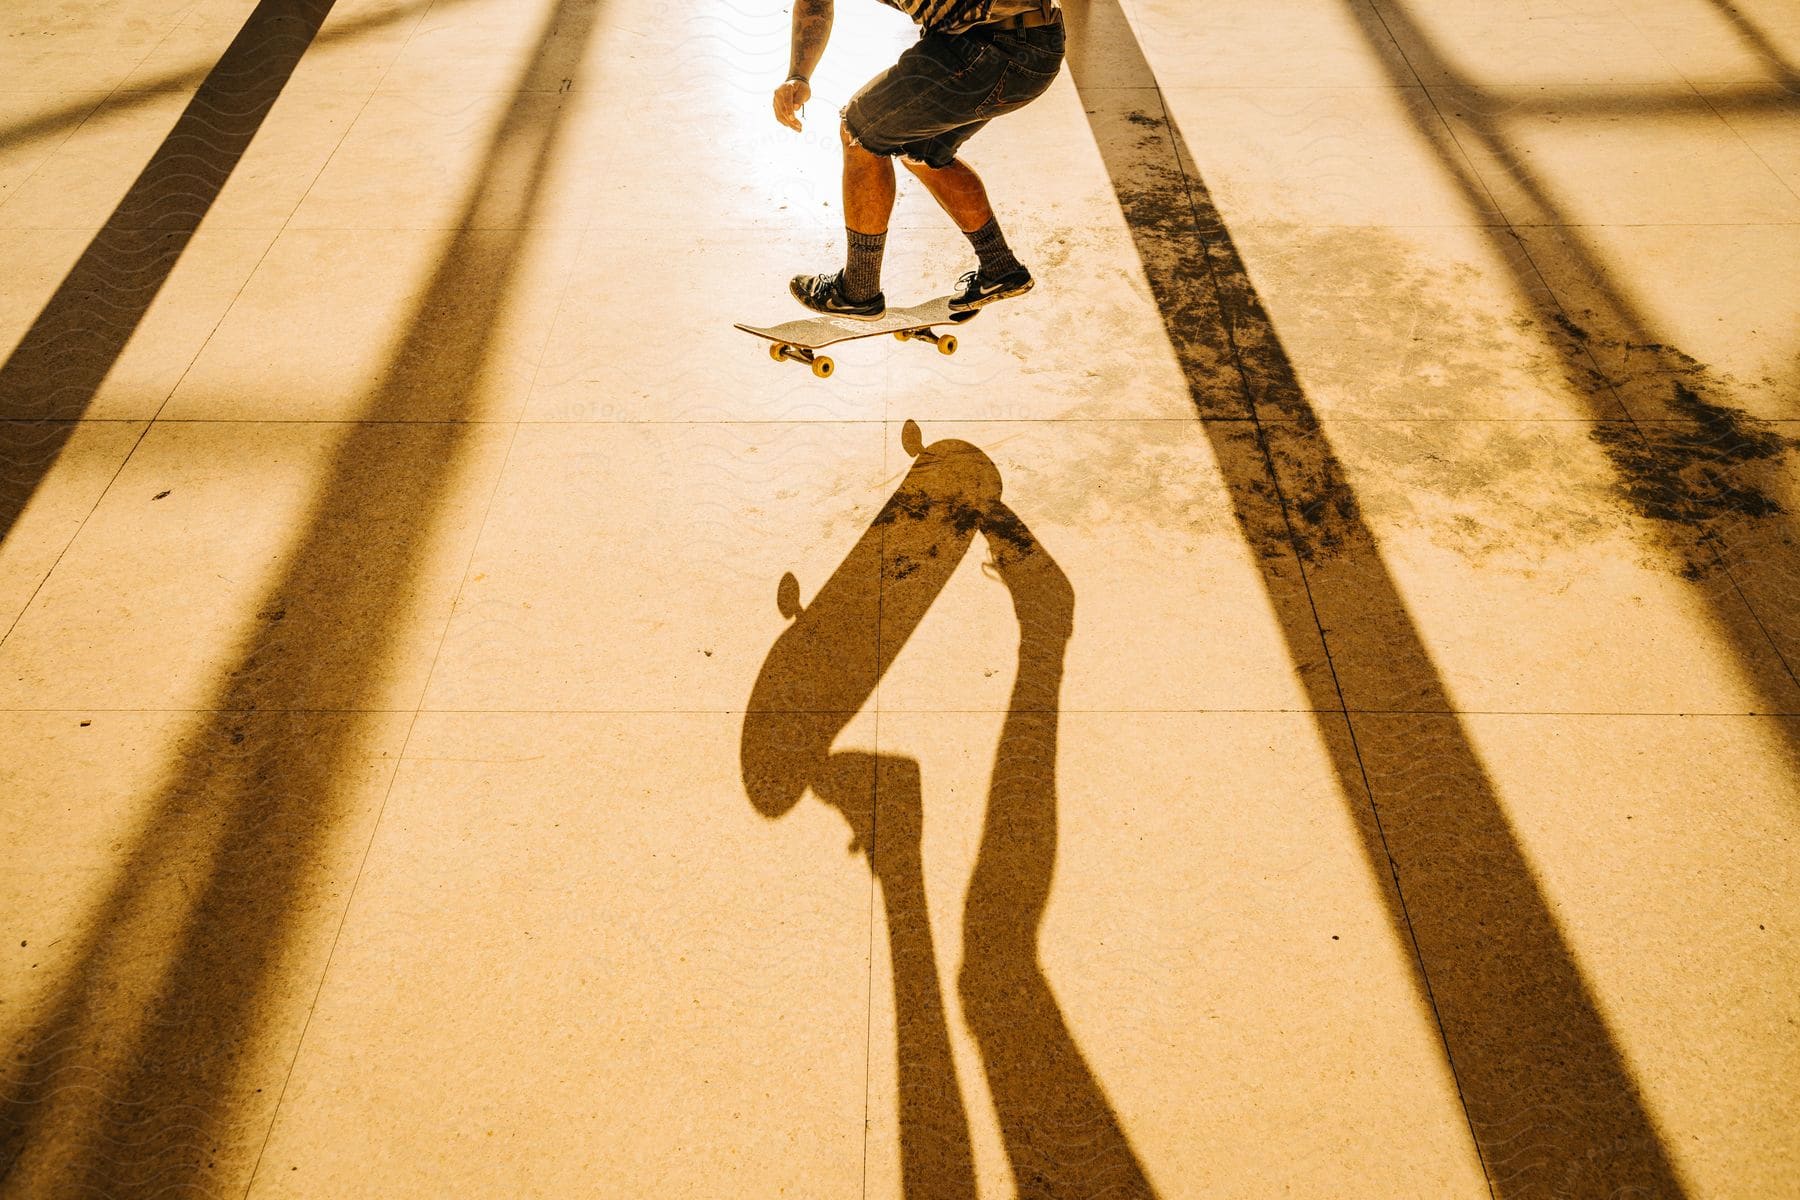 The feet of a man wearing shorts, socks, and a shoe are visible as he performs a skateboard stunt. The sun's rays reflect shadows of the building beams on the floor